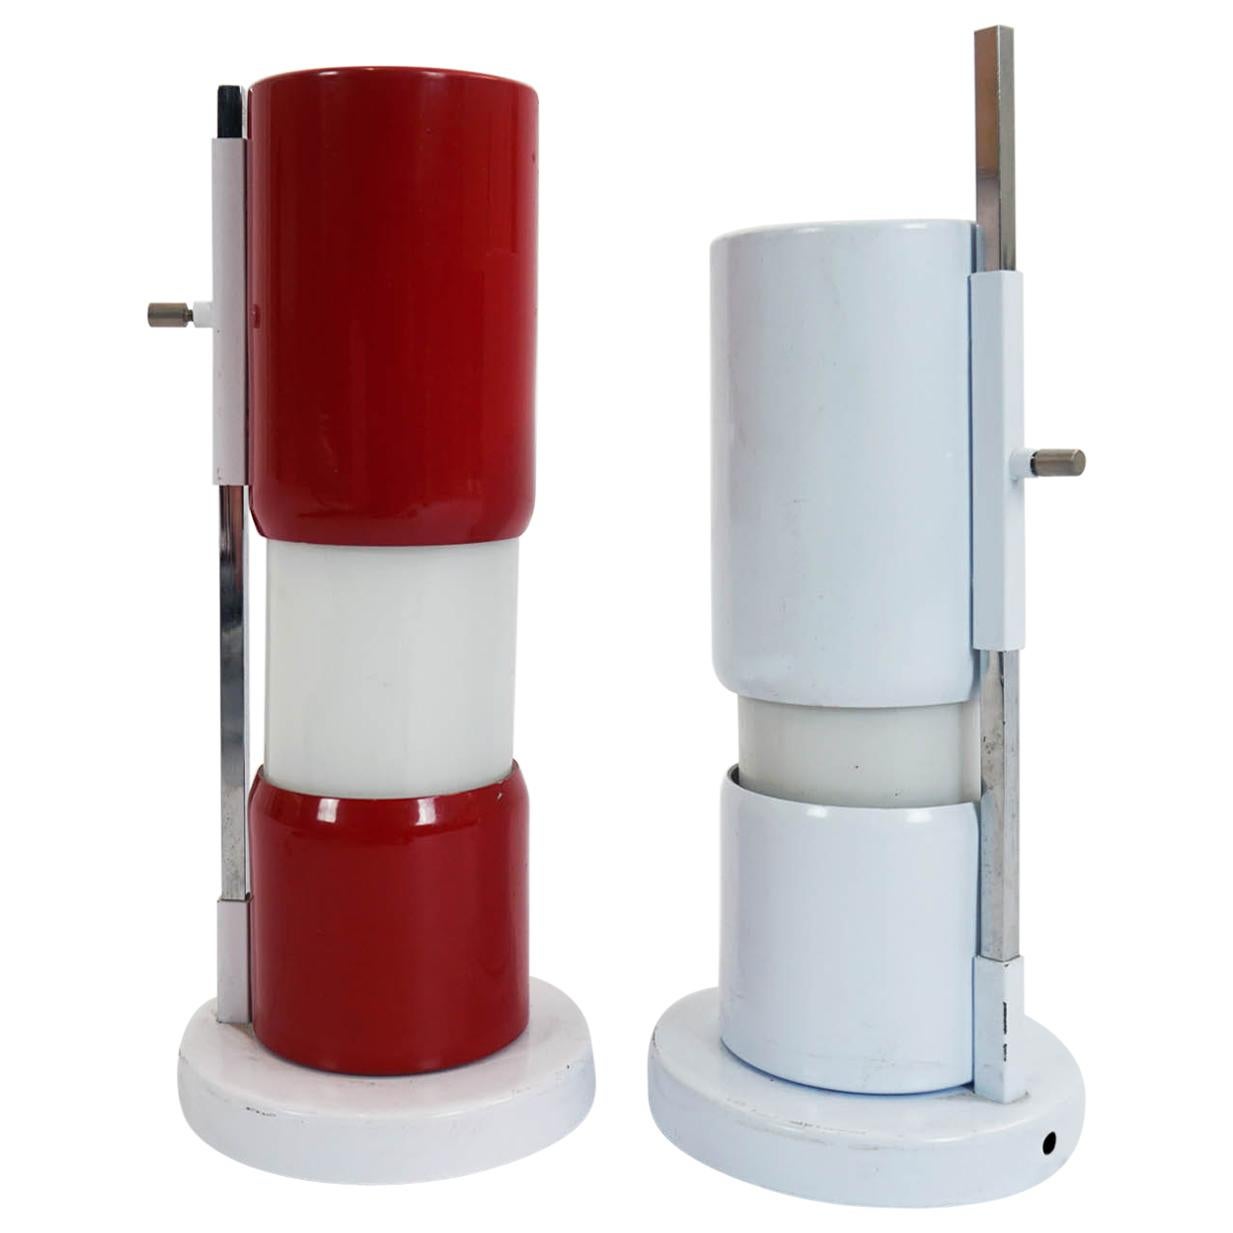 Adjustable Table Lamps For Sale